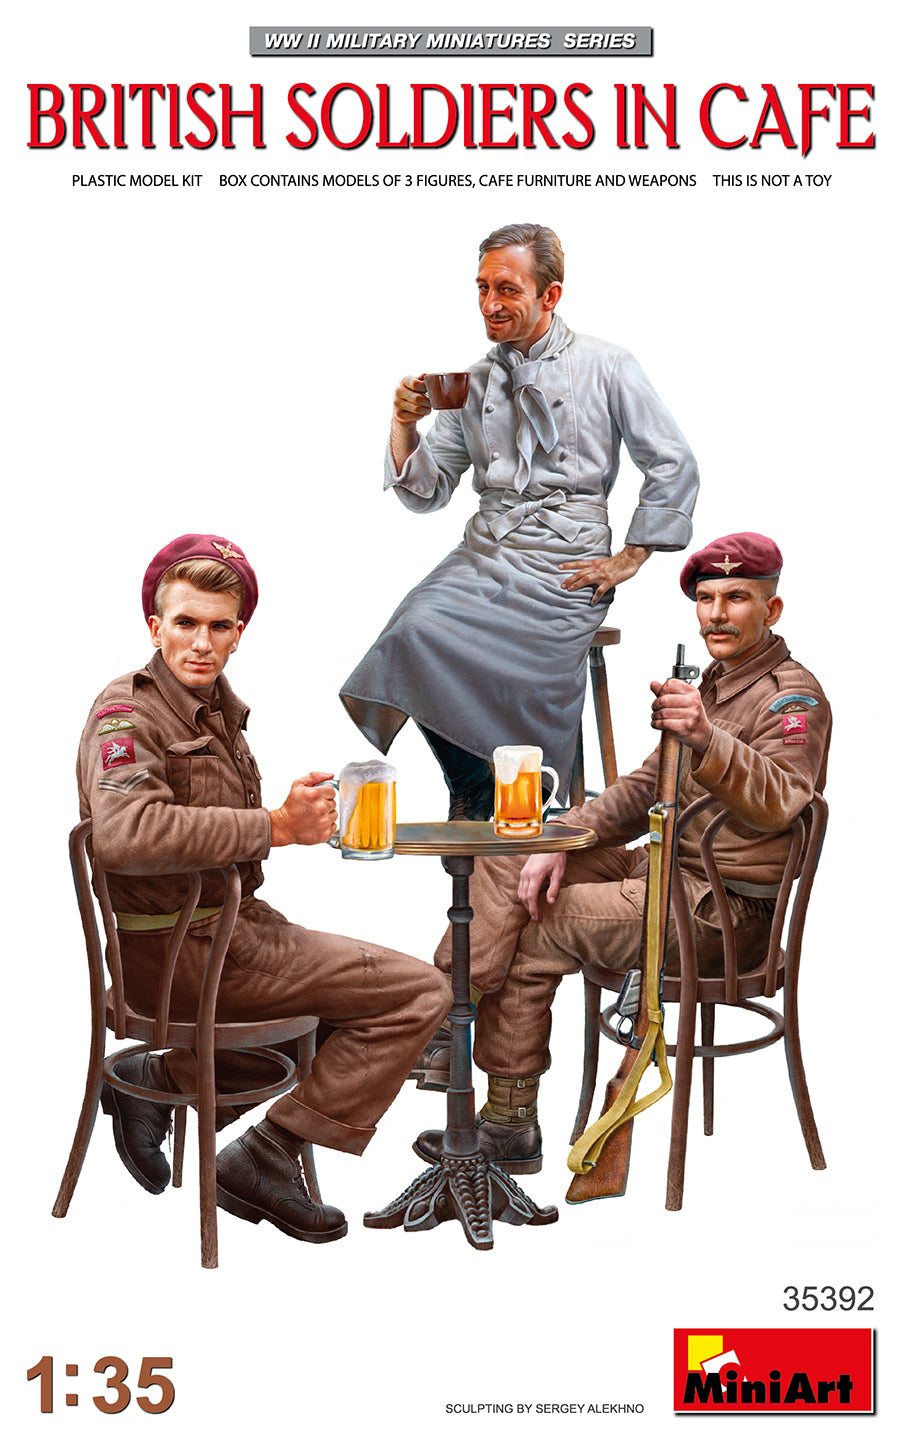 Miniart 1/35 Scale British Soldiers in Cafe